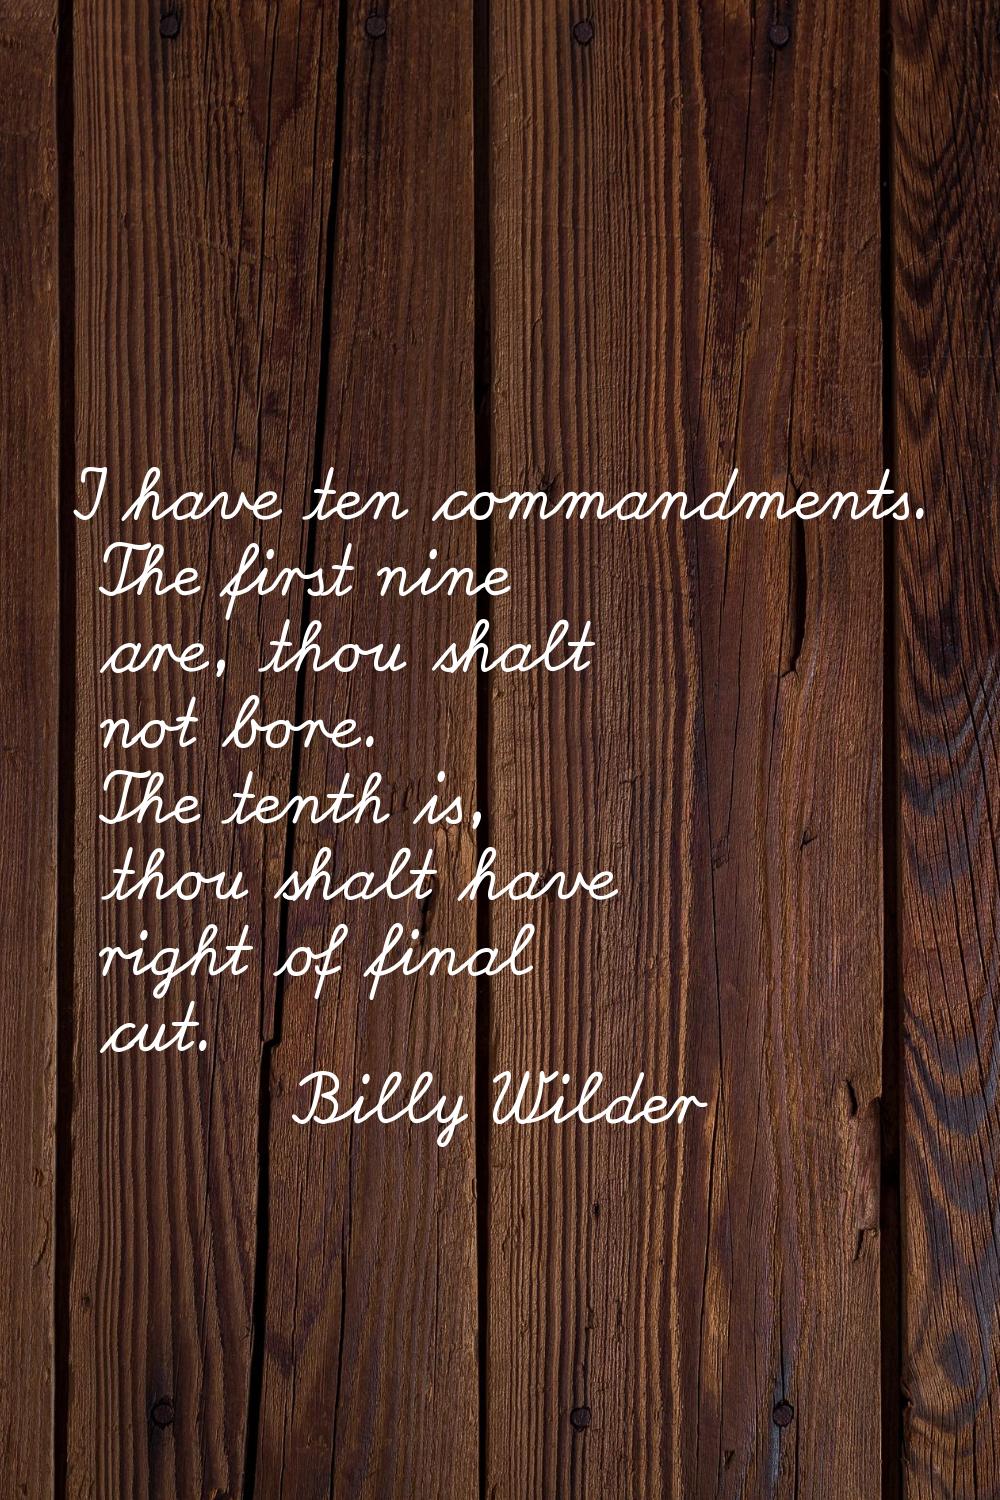 I have ten commandments. The first nine are, thou shalt not bore. The tenth is, thou shalt have rig